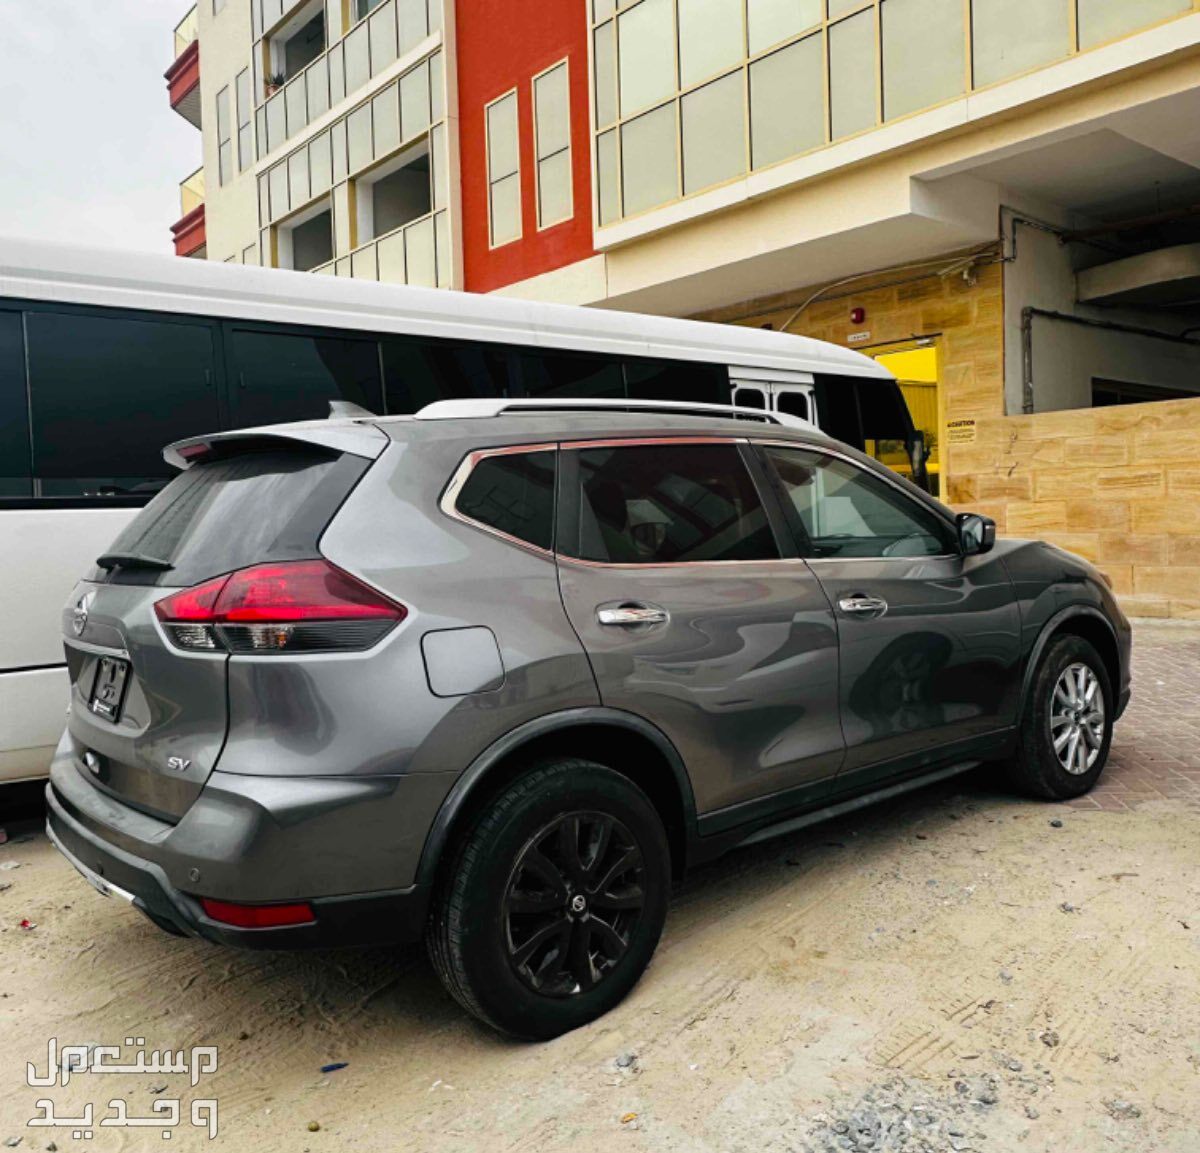 Nissan Rogue 2020 in Dubai at a price of 42 thousands AED